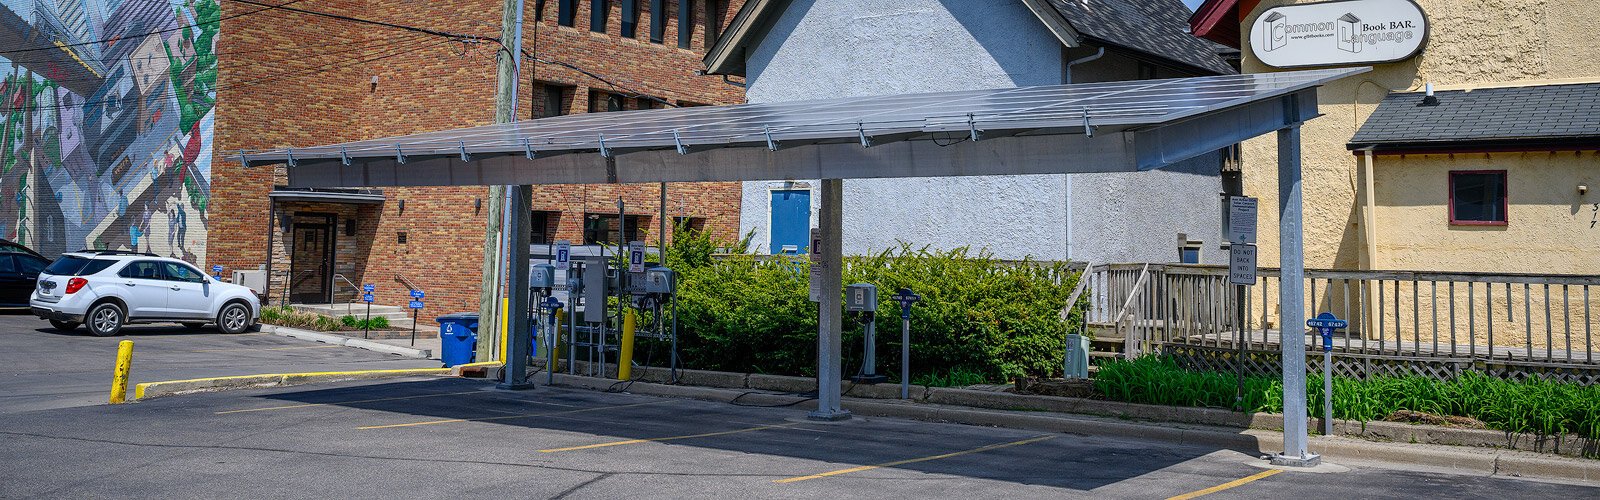 Solar powered EV charging stations at 4th Avenue and Catherine Street in Ann Arbor.